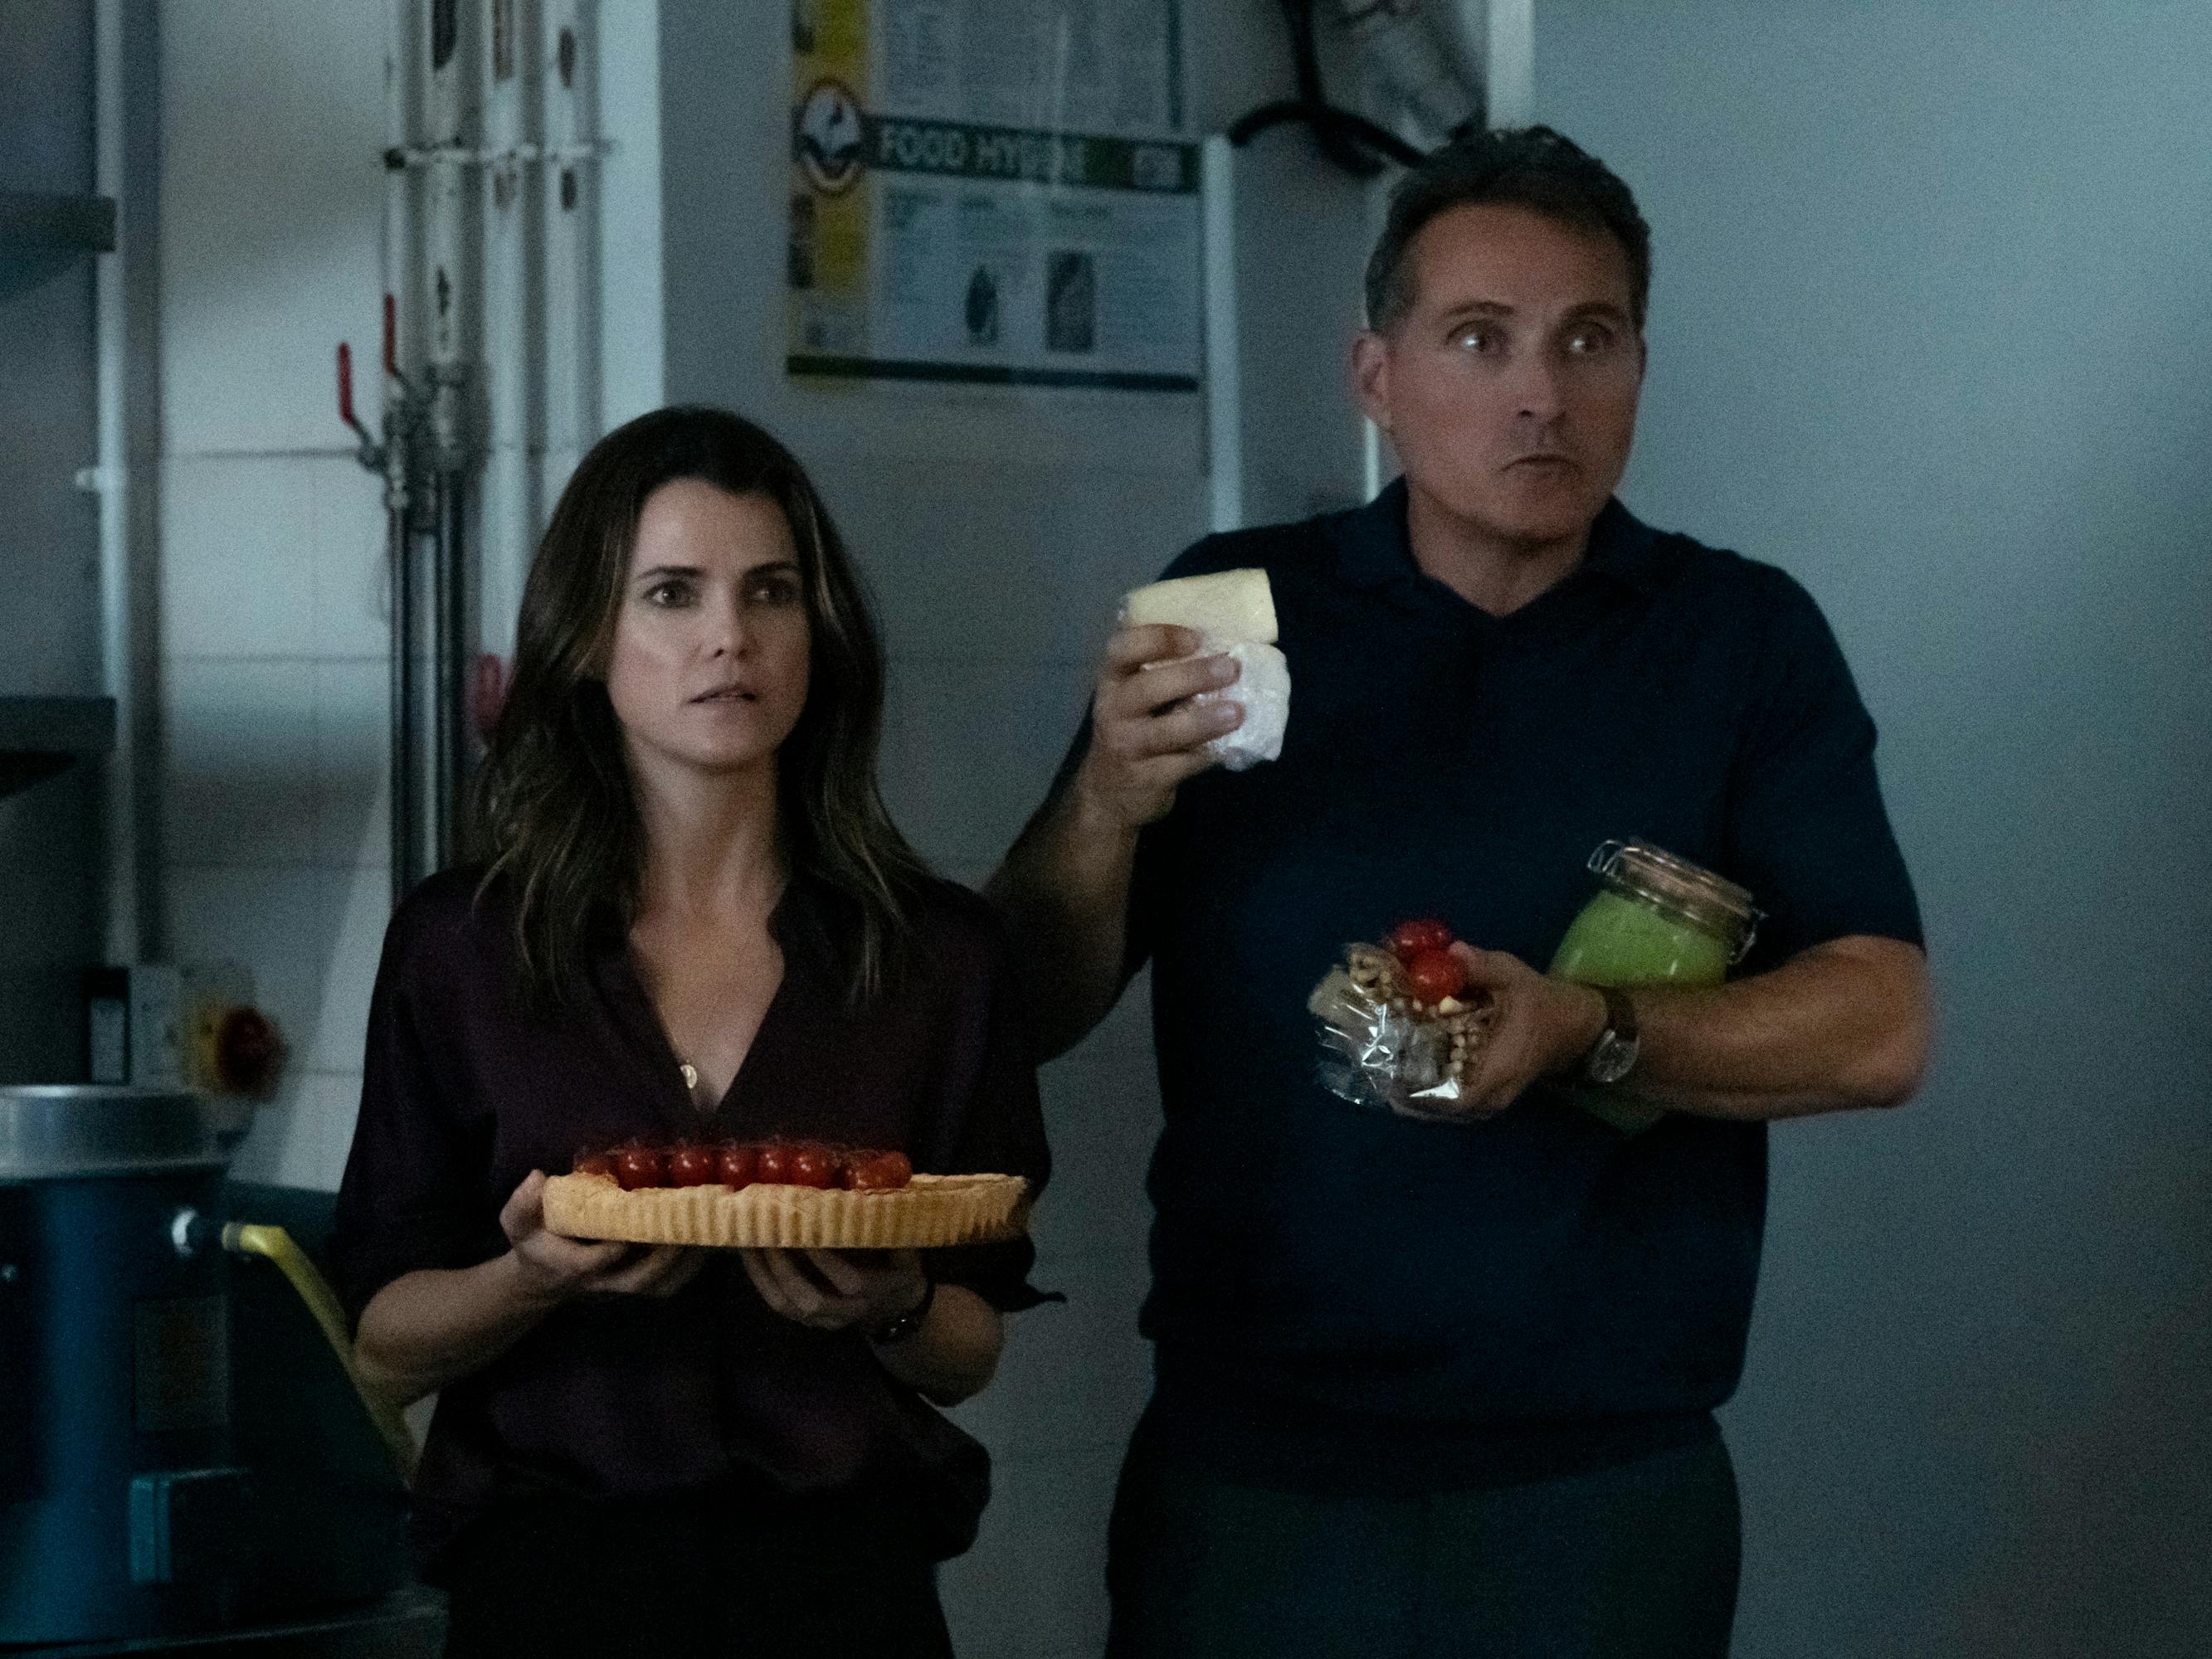 Kate Wyler (Keri Russell) and Hal Wyler (Rufus Sewell) get caught red-handed with some stolen snacks in their arms.